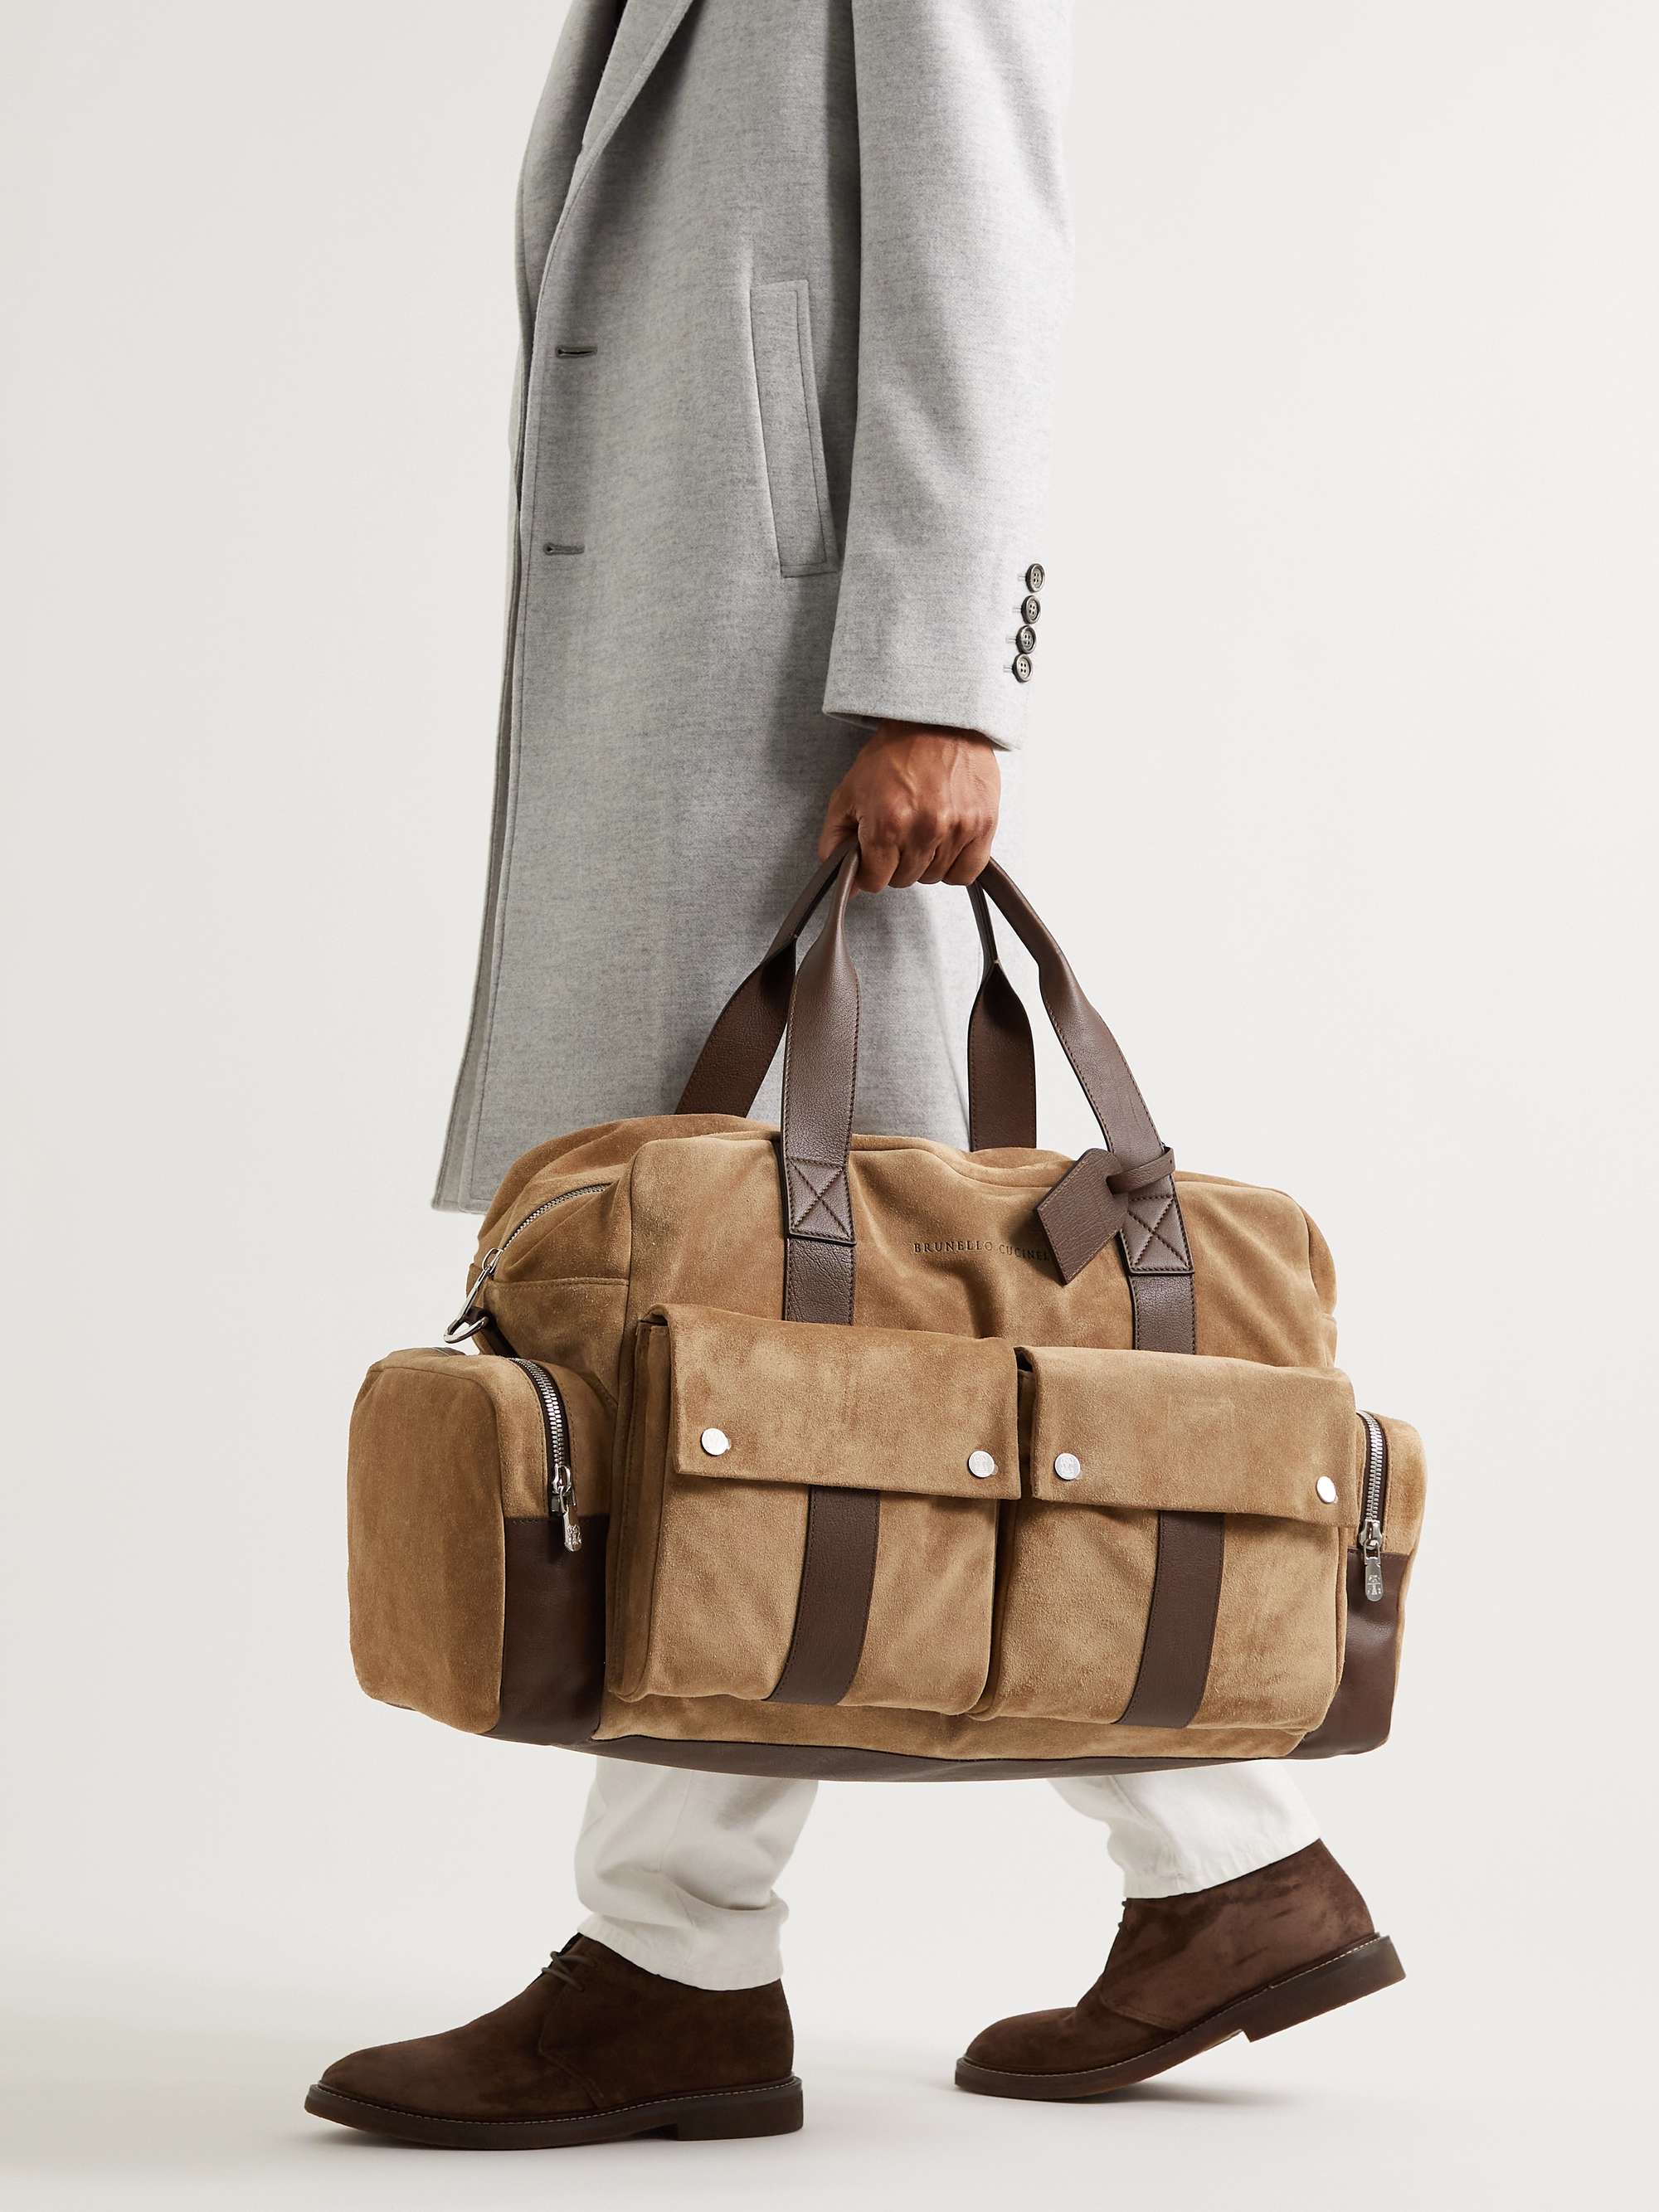 BRUNELLO CUCINELLI Leather-Trimmed Suede Holdall